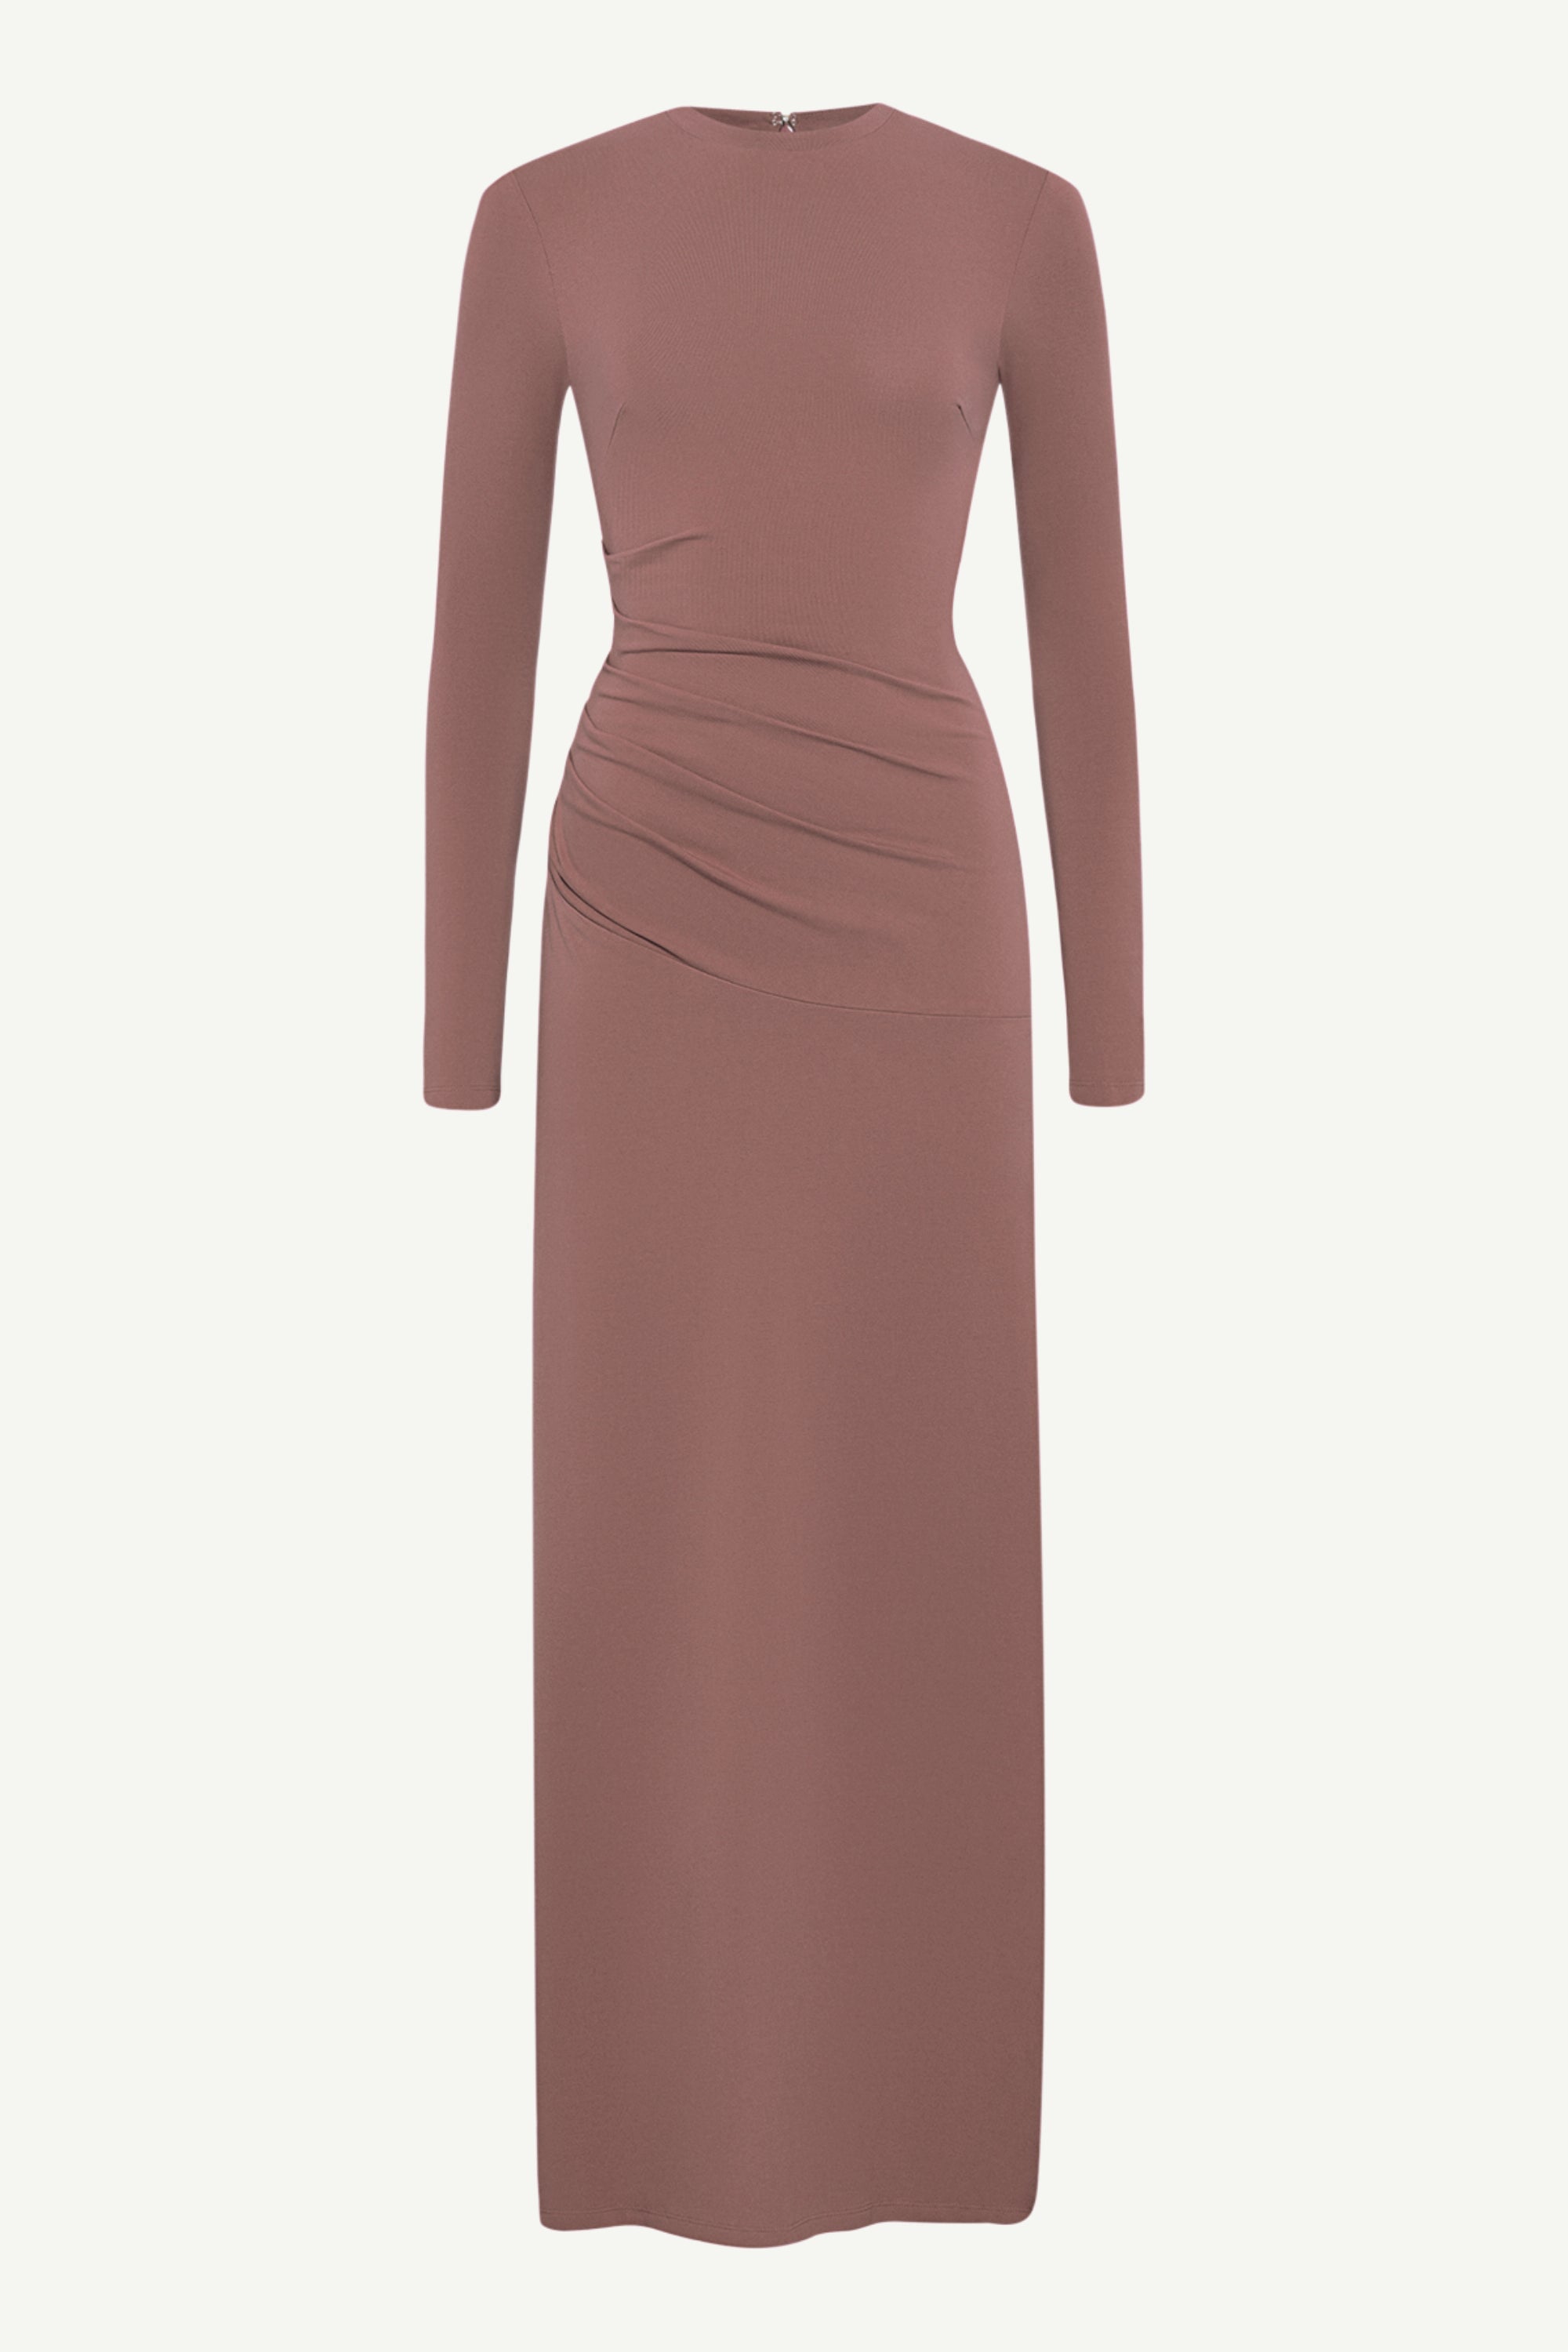 Natalie Rouched Jersey Maxi Dress - Deep Taupe Clothing Veiled 